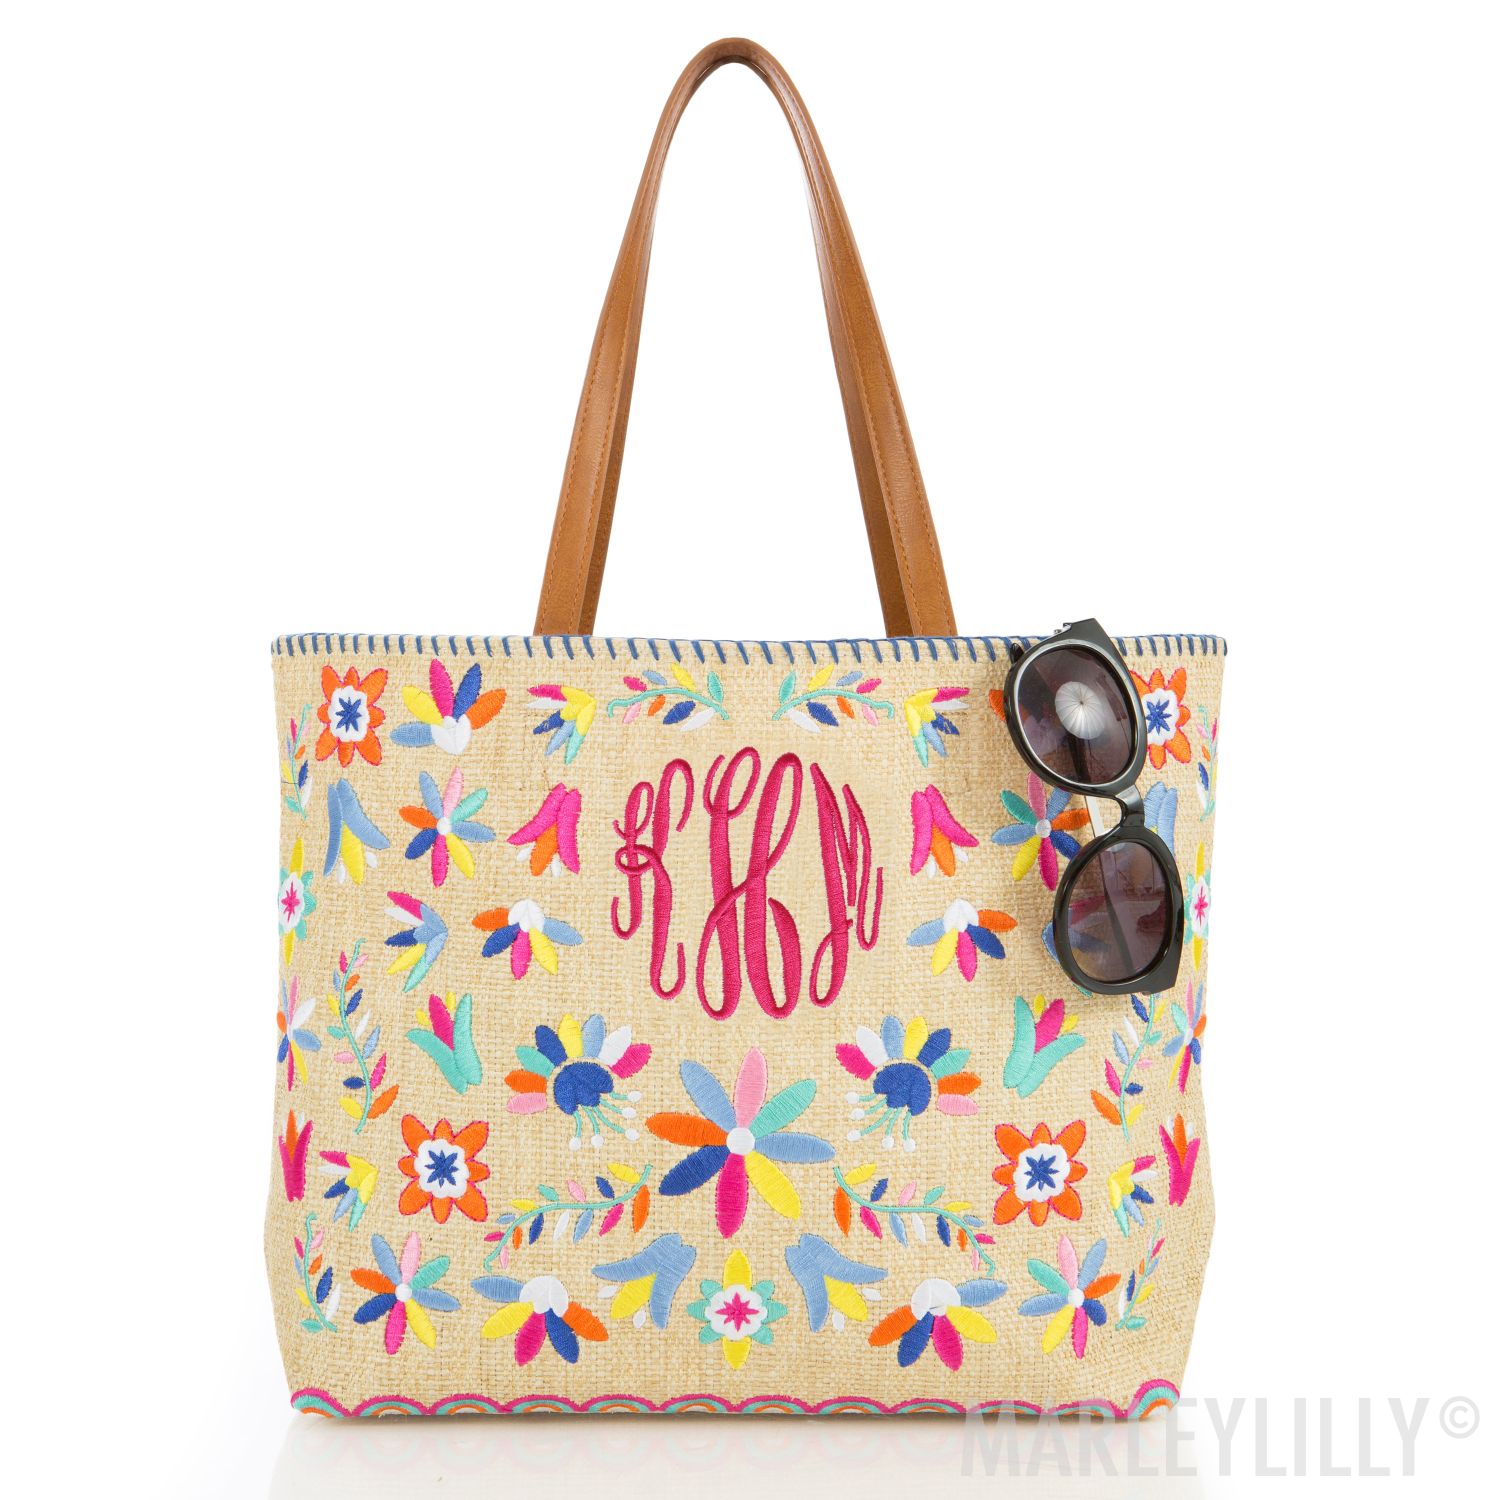 adorable mexican inspired tote